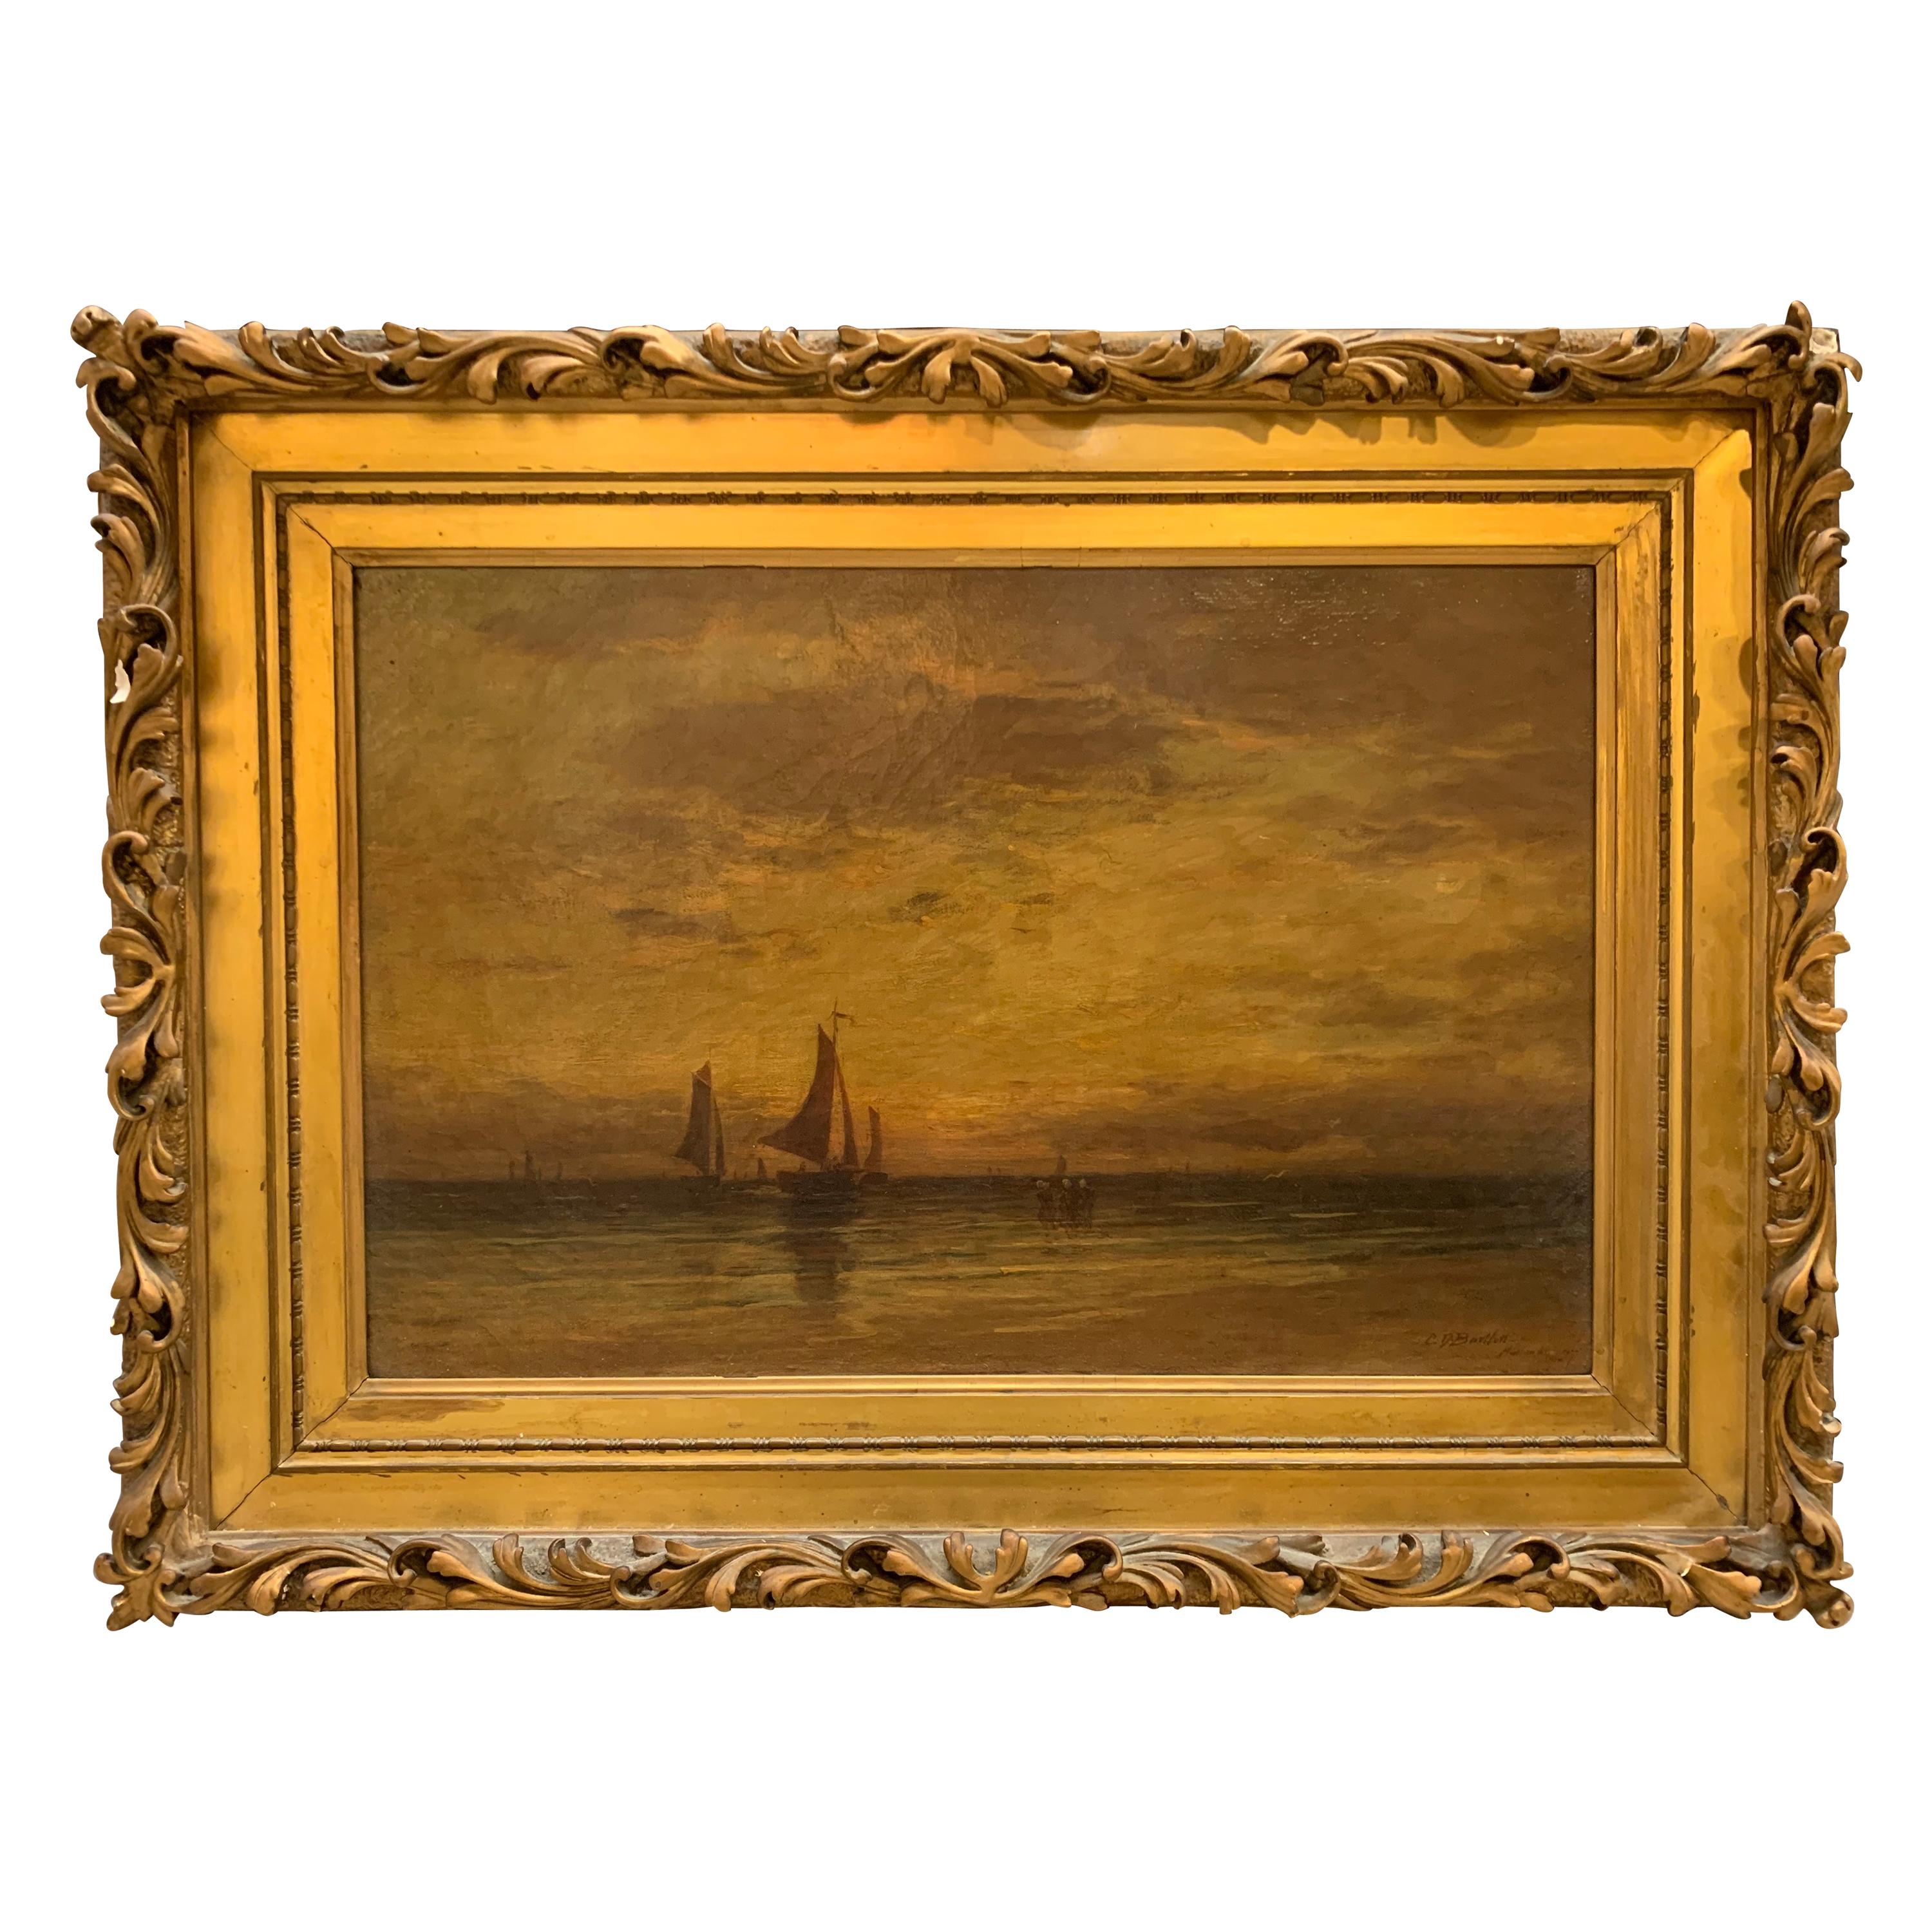 Antique Seascape with Sailboats Oil Painting Signed